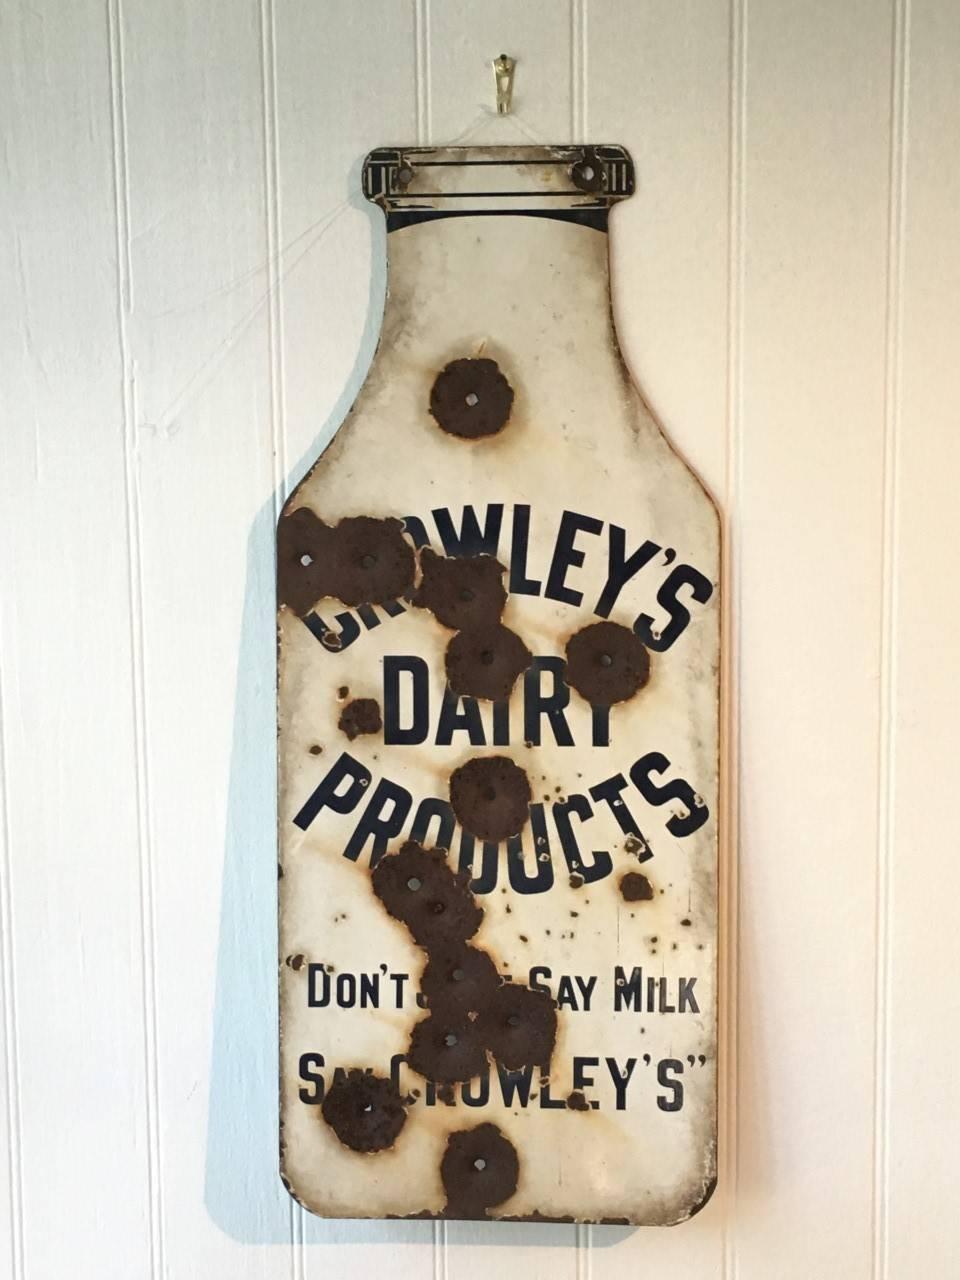 Americana blends seamlessly into folk art with this double-sided enamel dairy trade side, later utilized for target shooting, mid-20th century.

Advertisement reads:
Crowley's Dairy Products.
"Don't just say milk, say crowley's."
 